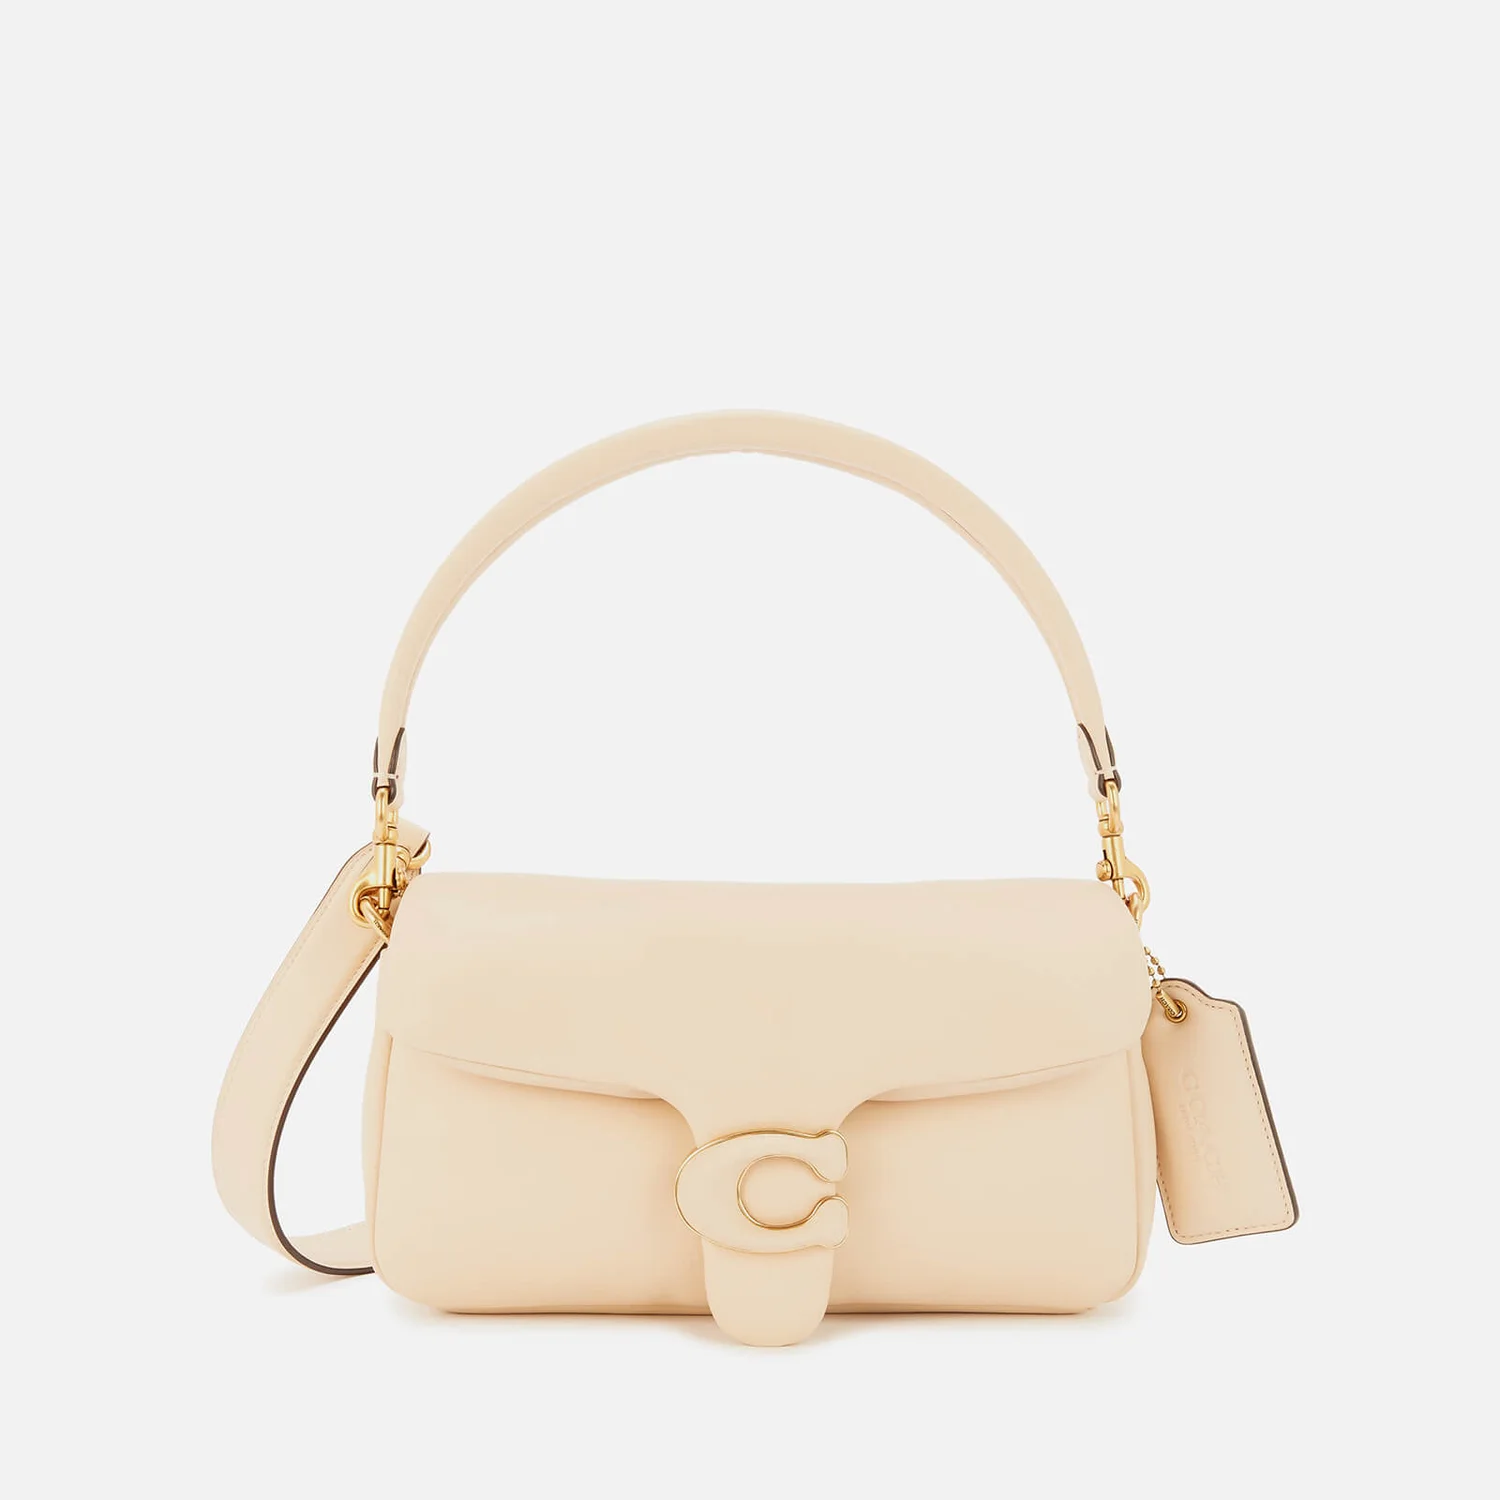 Best Designer Bags Under $2,000 for Spring - cathclaire